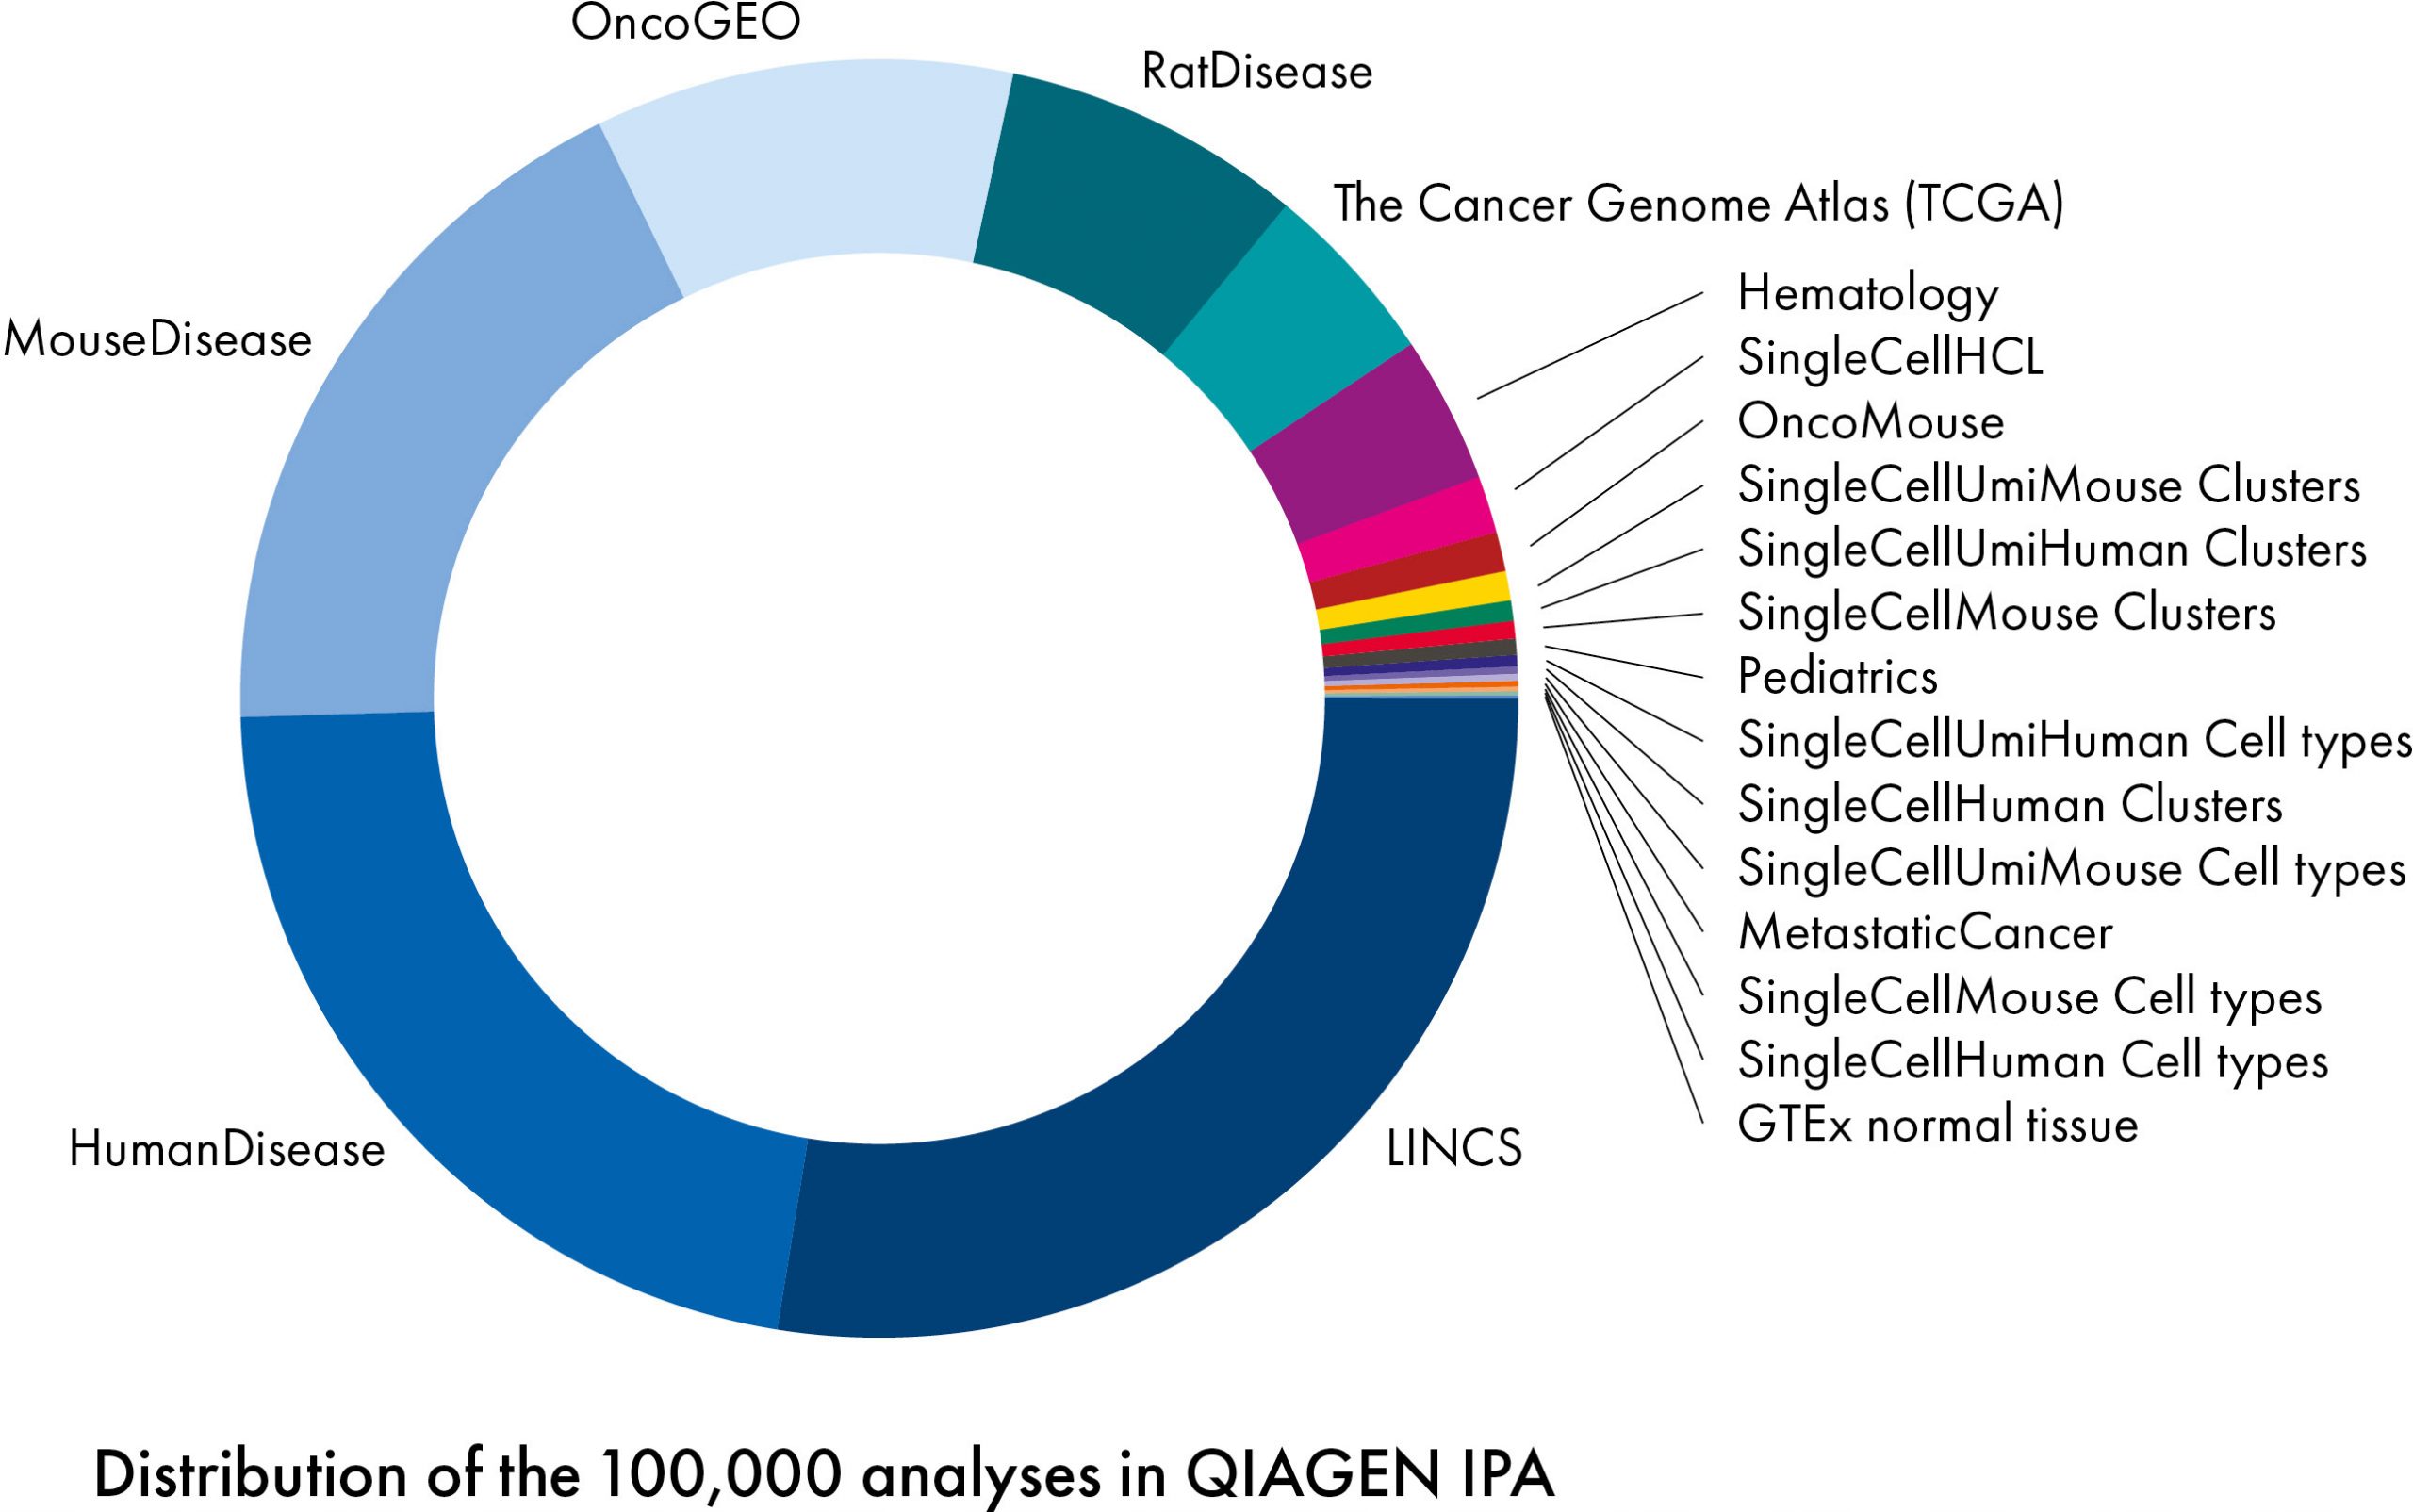 QIAGEN IPA Analysis Match now includes over 100,000 analyses to help advance your research